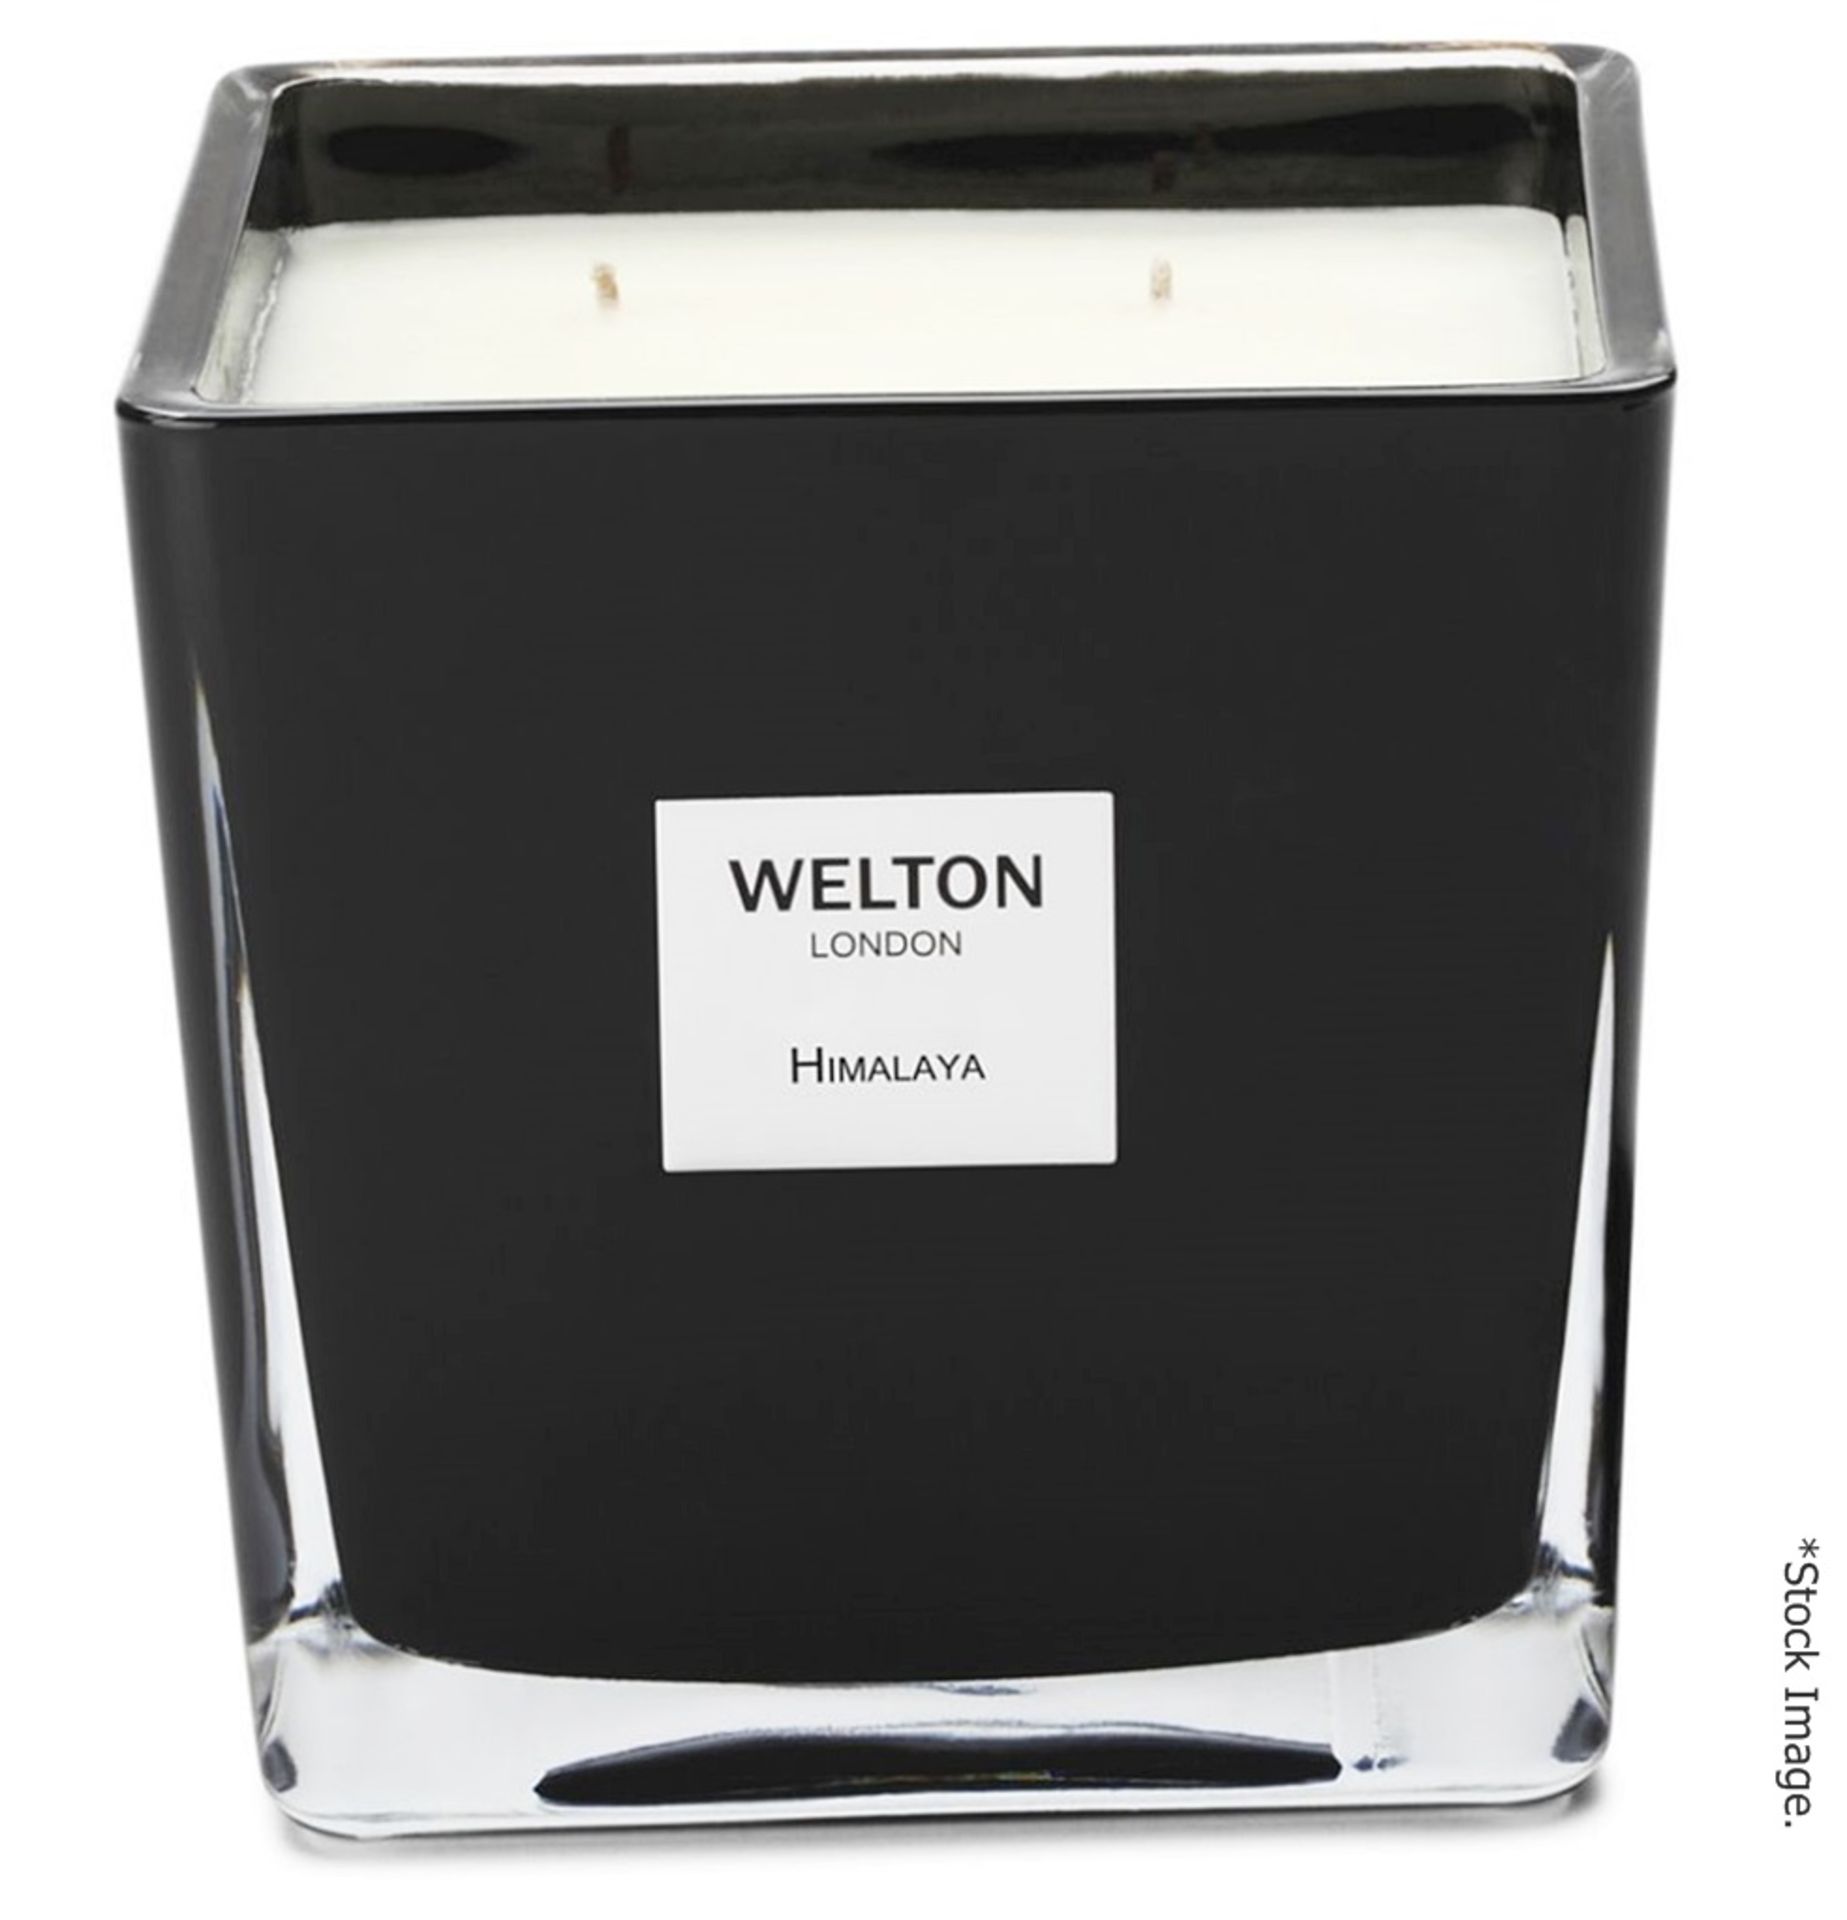 1 x WELTON 'Himalaya' 1.2Kg Luxury Scented Candle - Boxed Stock - Original RRP £125.00